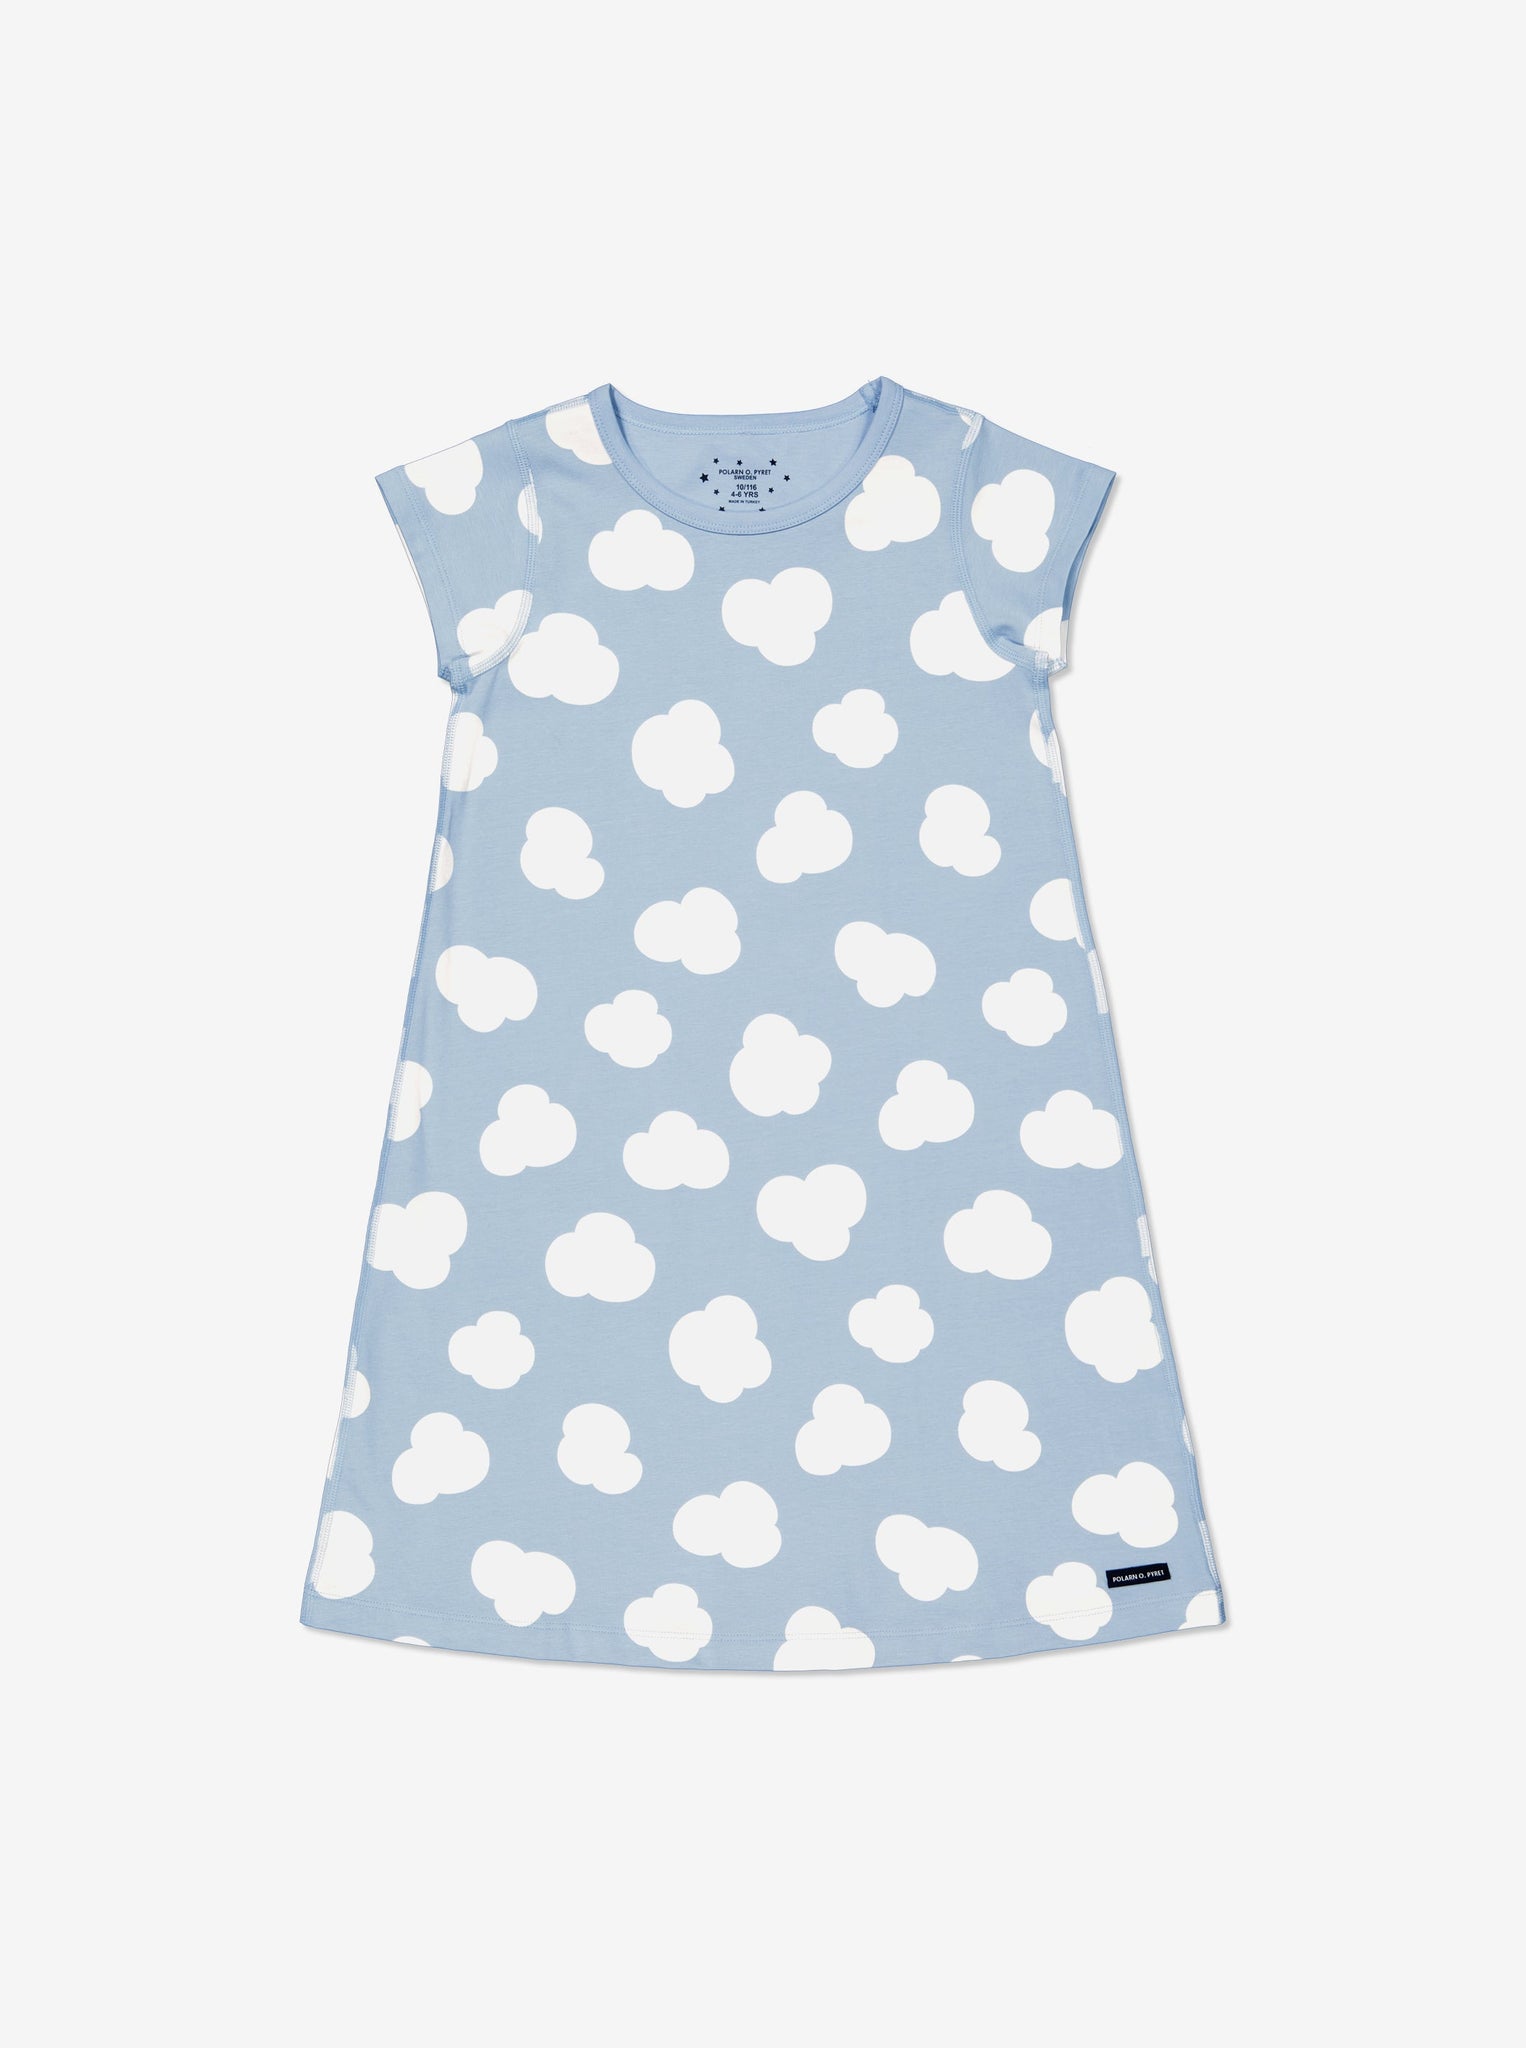  Cotton Cloud Print Kids Nightdress from Polarn O. Pyret Kidswear. Made using sustainable materials.